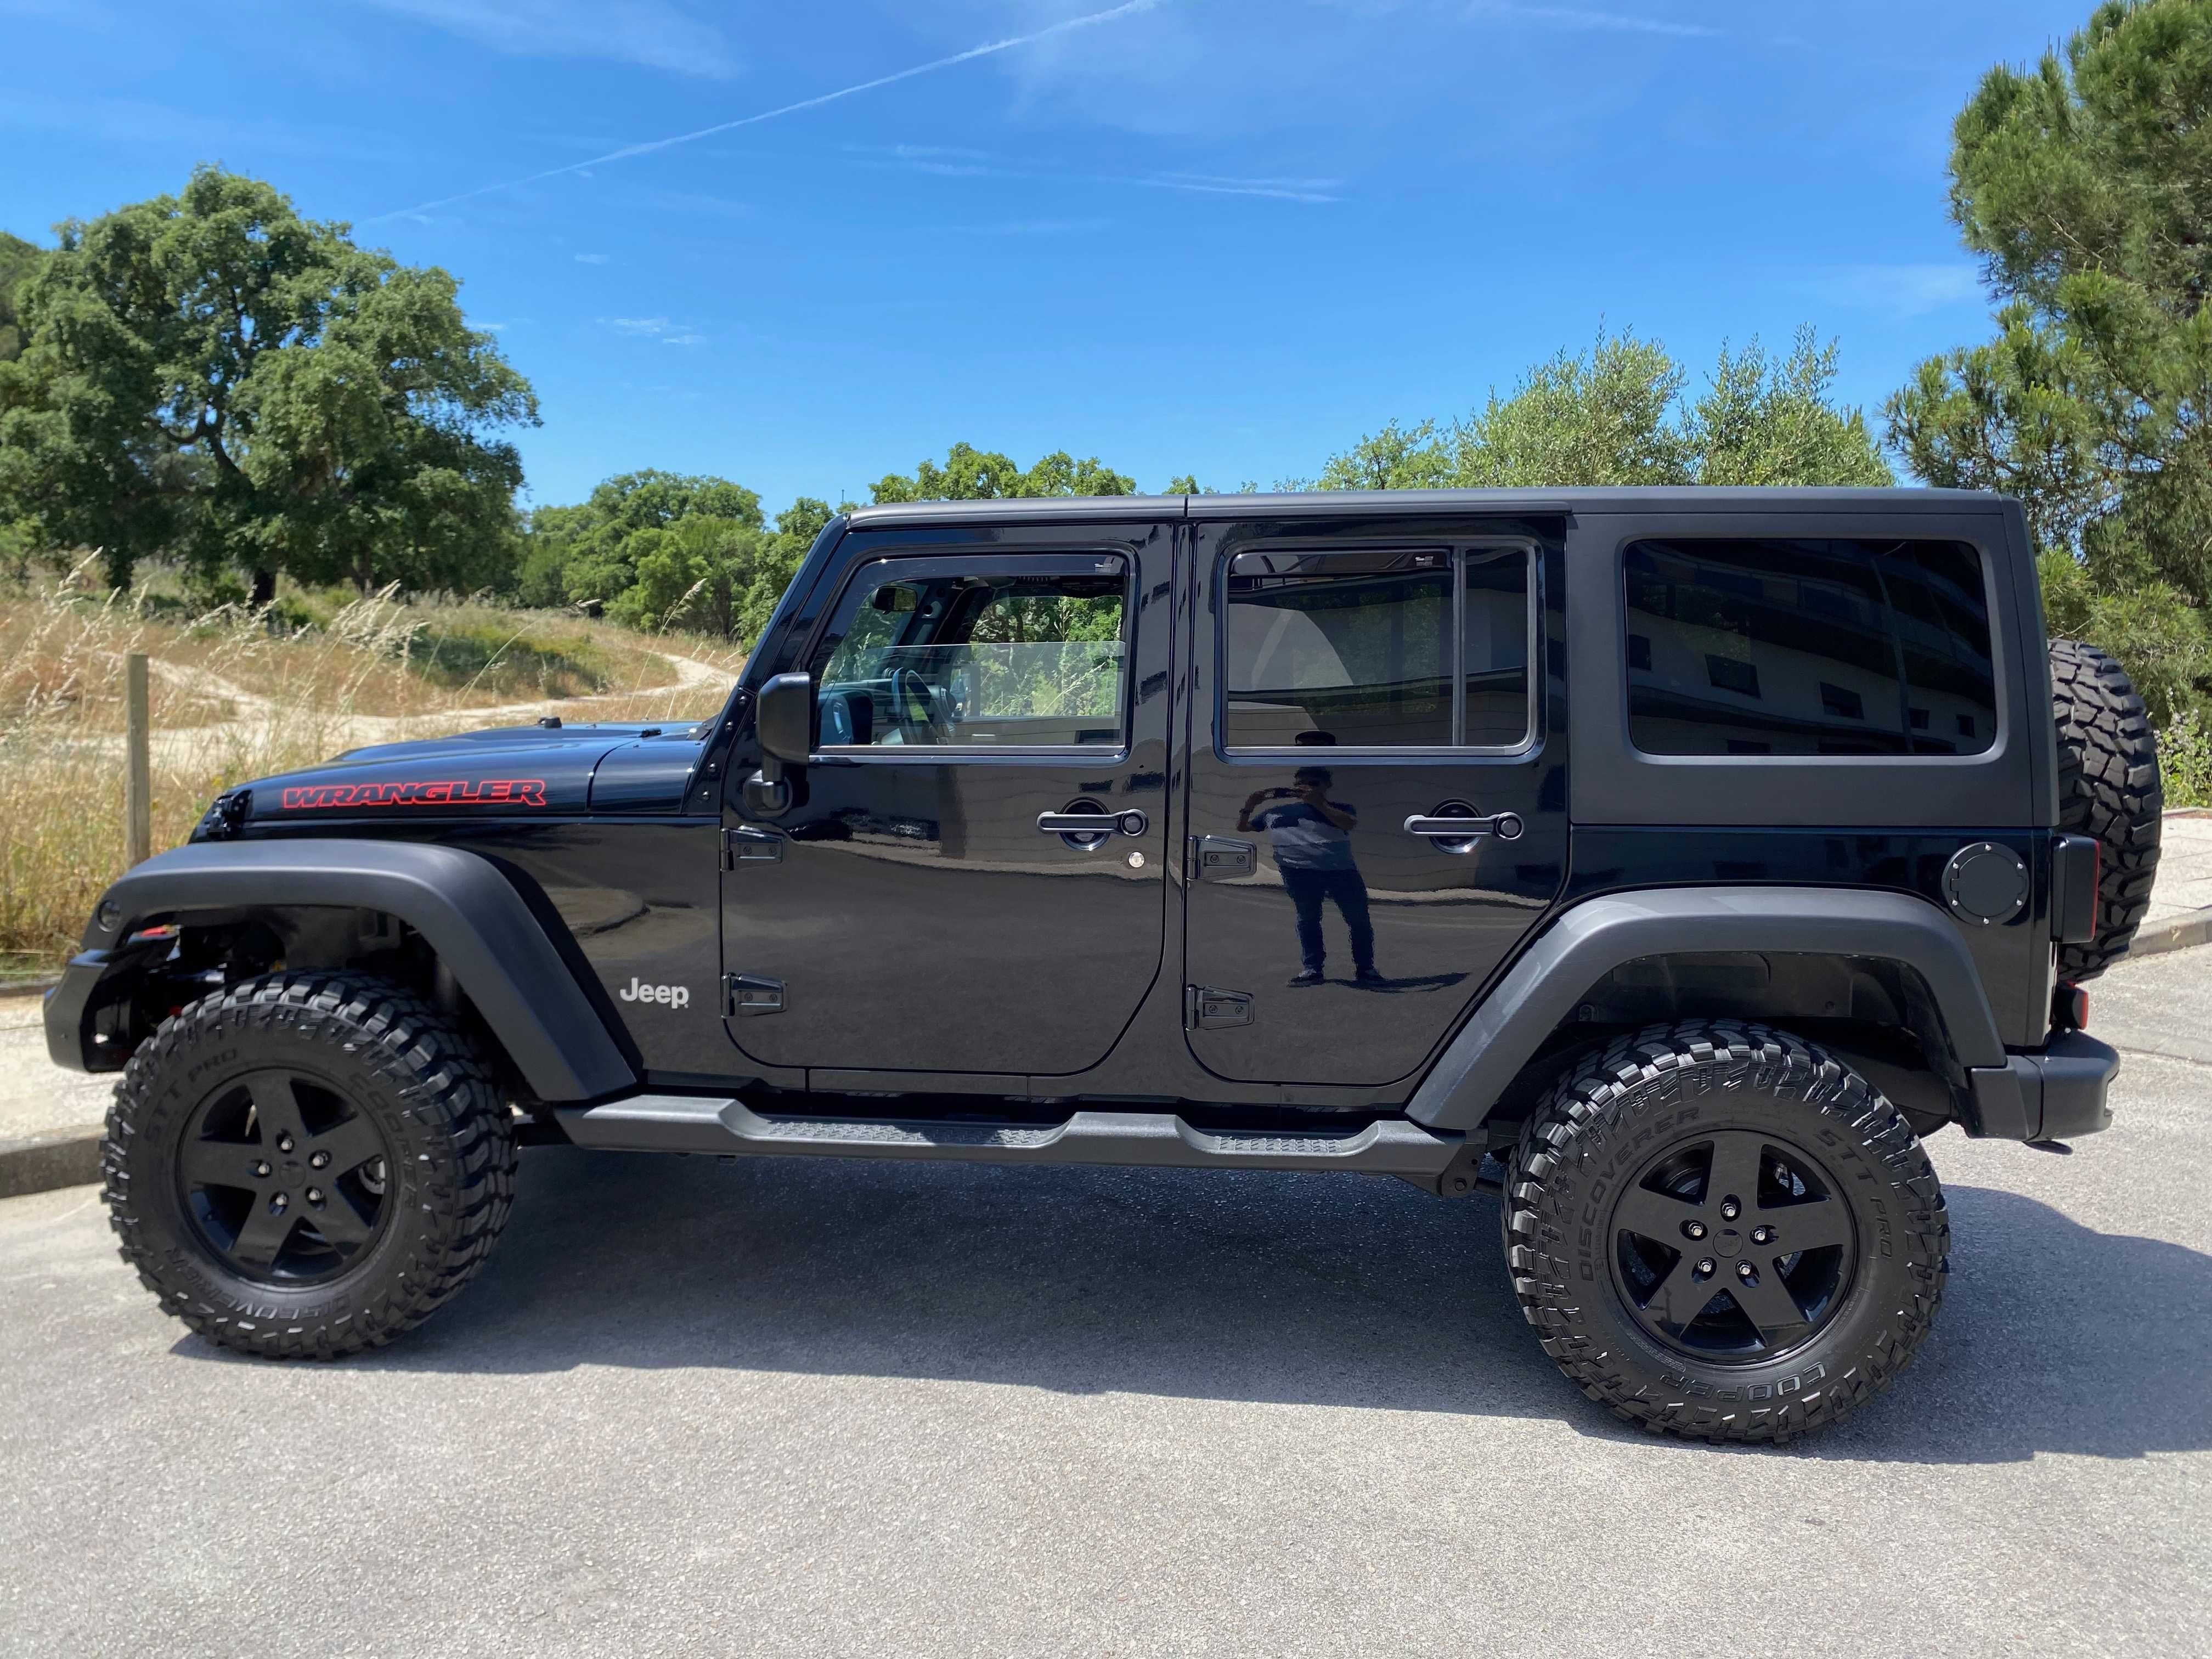 Jeep Wrangler Unlimited 2.8 CRD